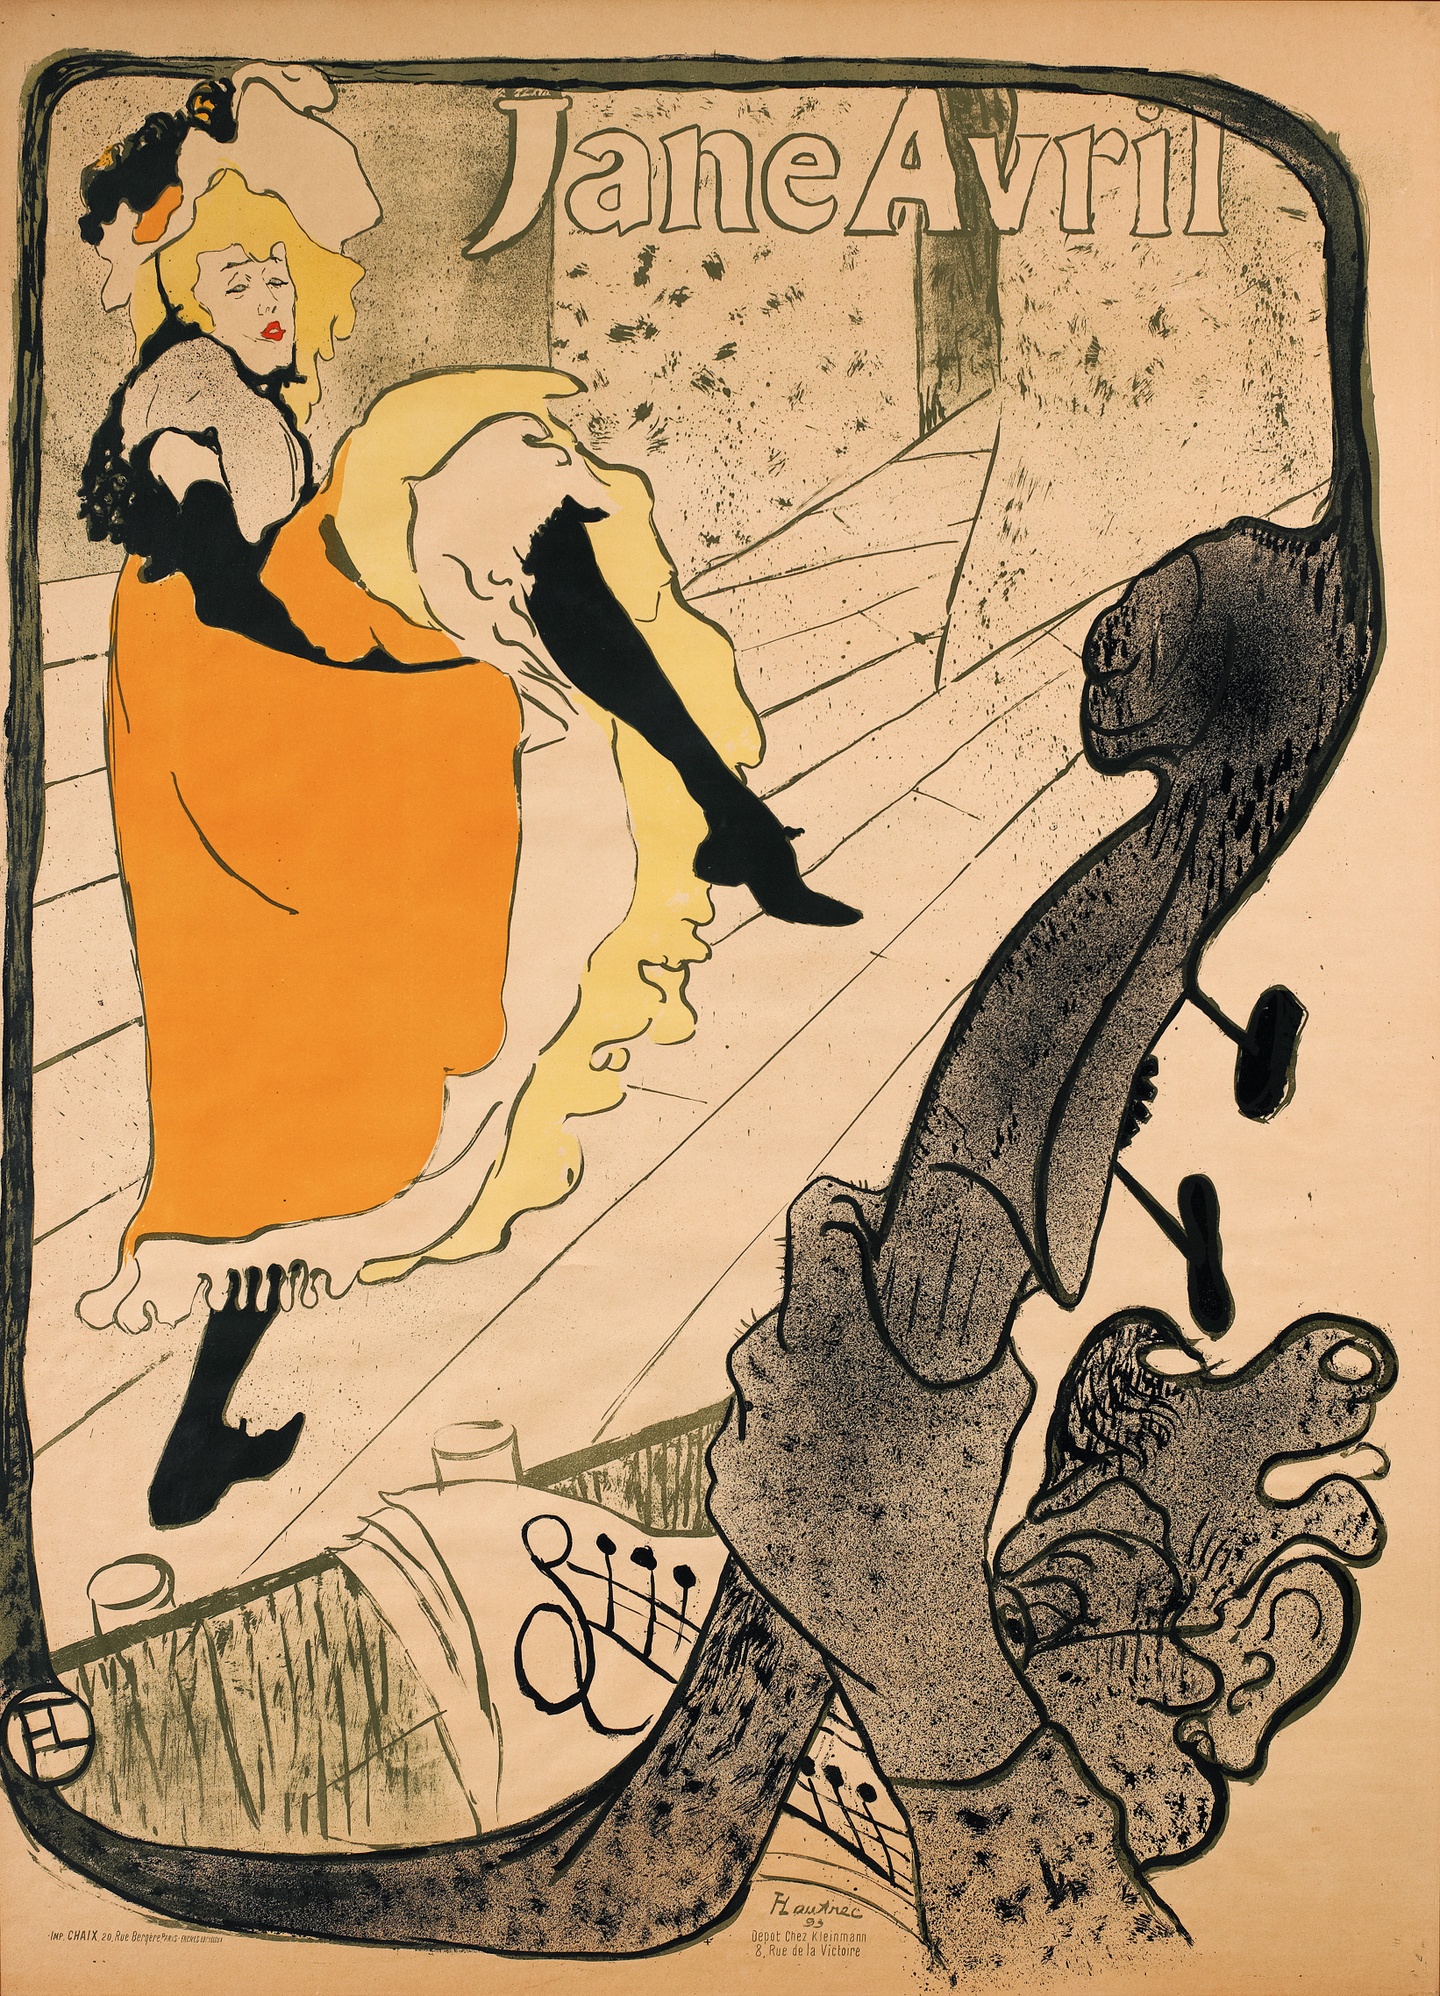 Color lithograph on a beige background, depicting a dancer wearing an ornate hat and a dress with a full orange skirt, with one stockinged leg lifted in the air. The words Jane Avril are in bubble letters at the top. This portion of the image is framed by a harp-like shape, in dark gray, with a hand holding the edge and drawn sheet music beneath.